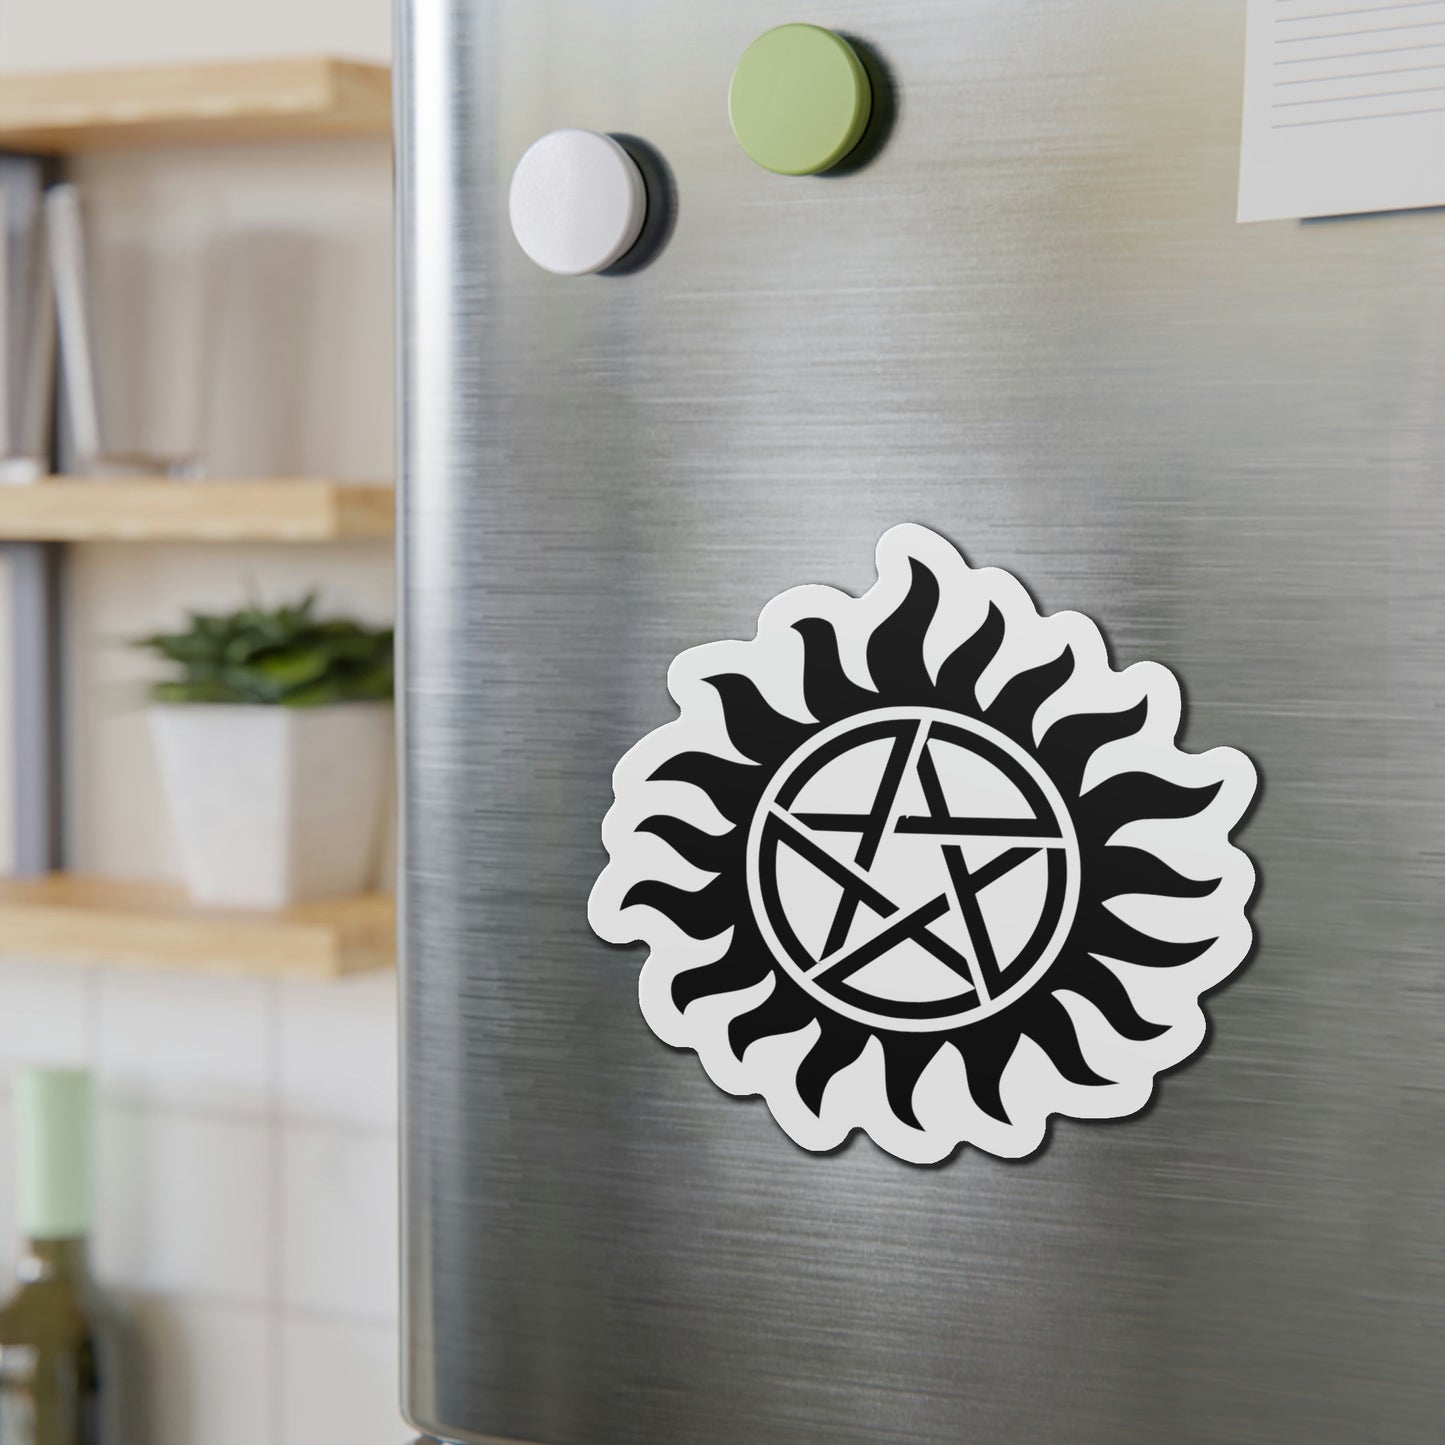 Supernatural inspired - anti-possession magnet - choice of 3 sizes